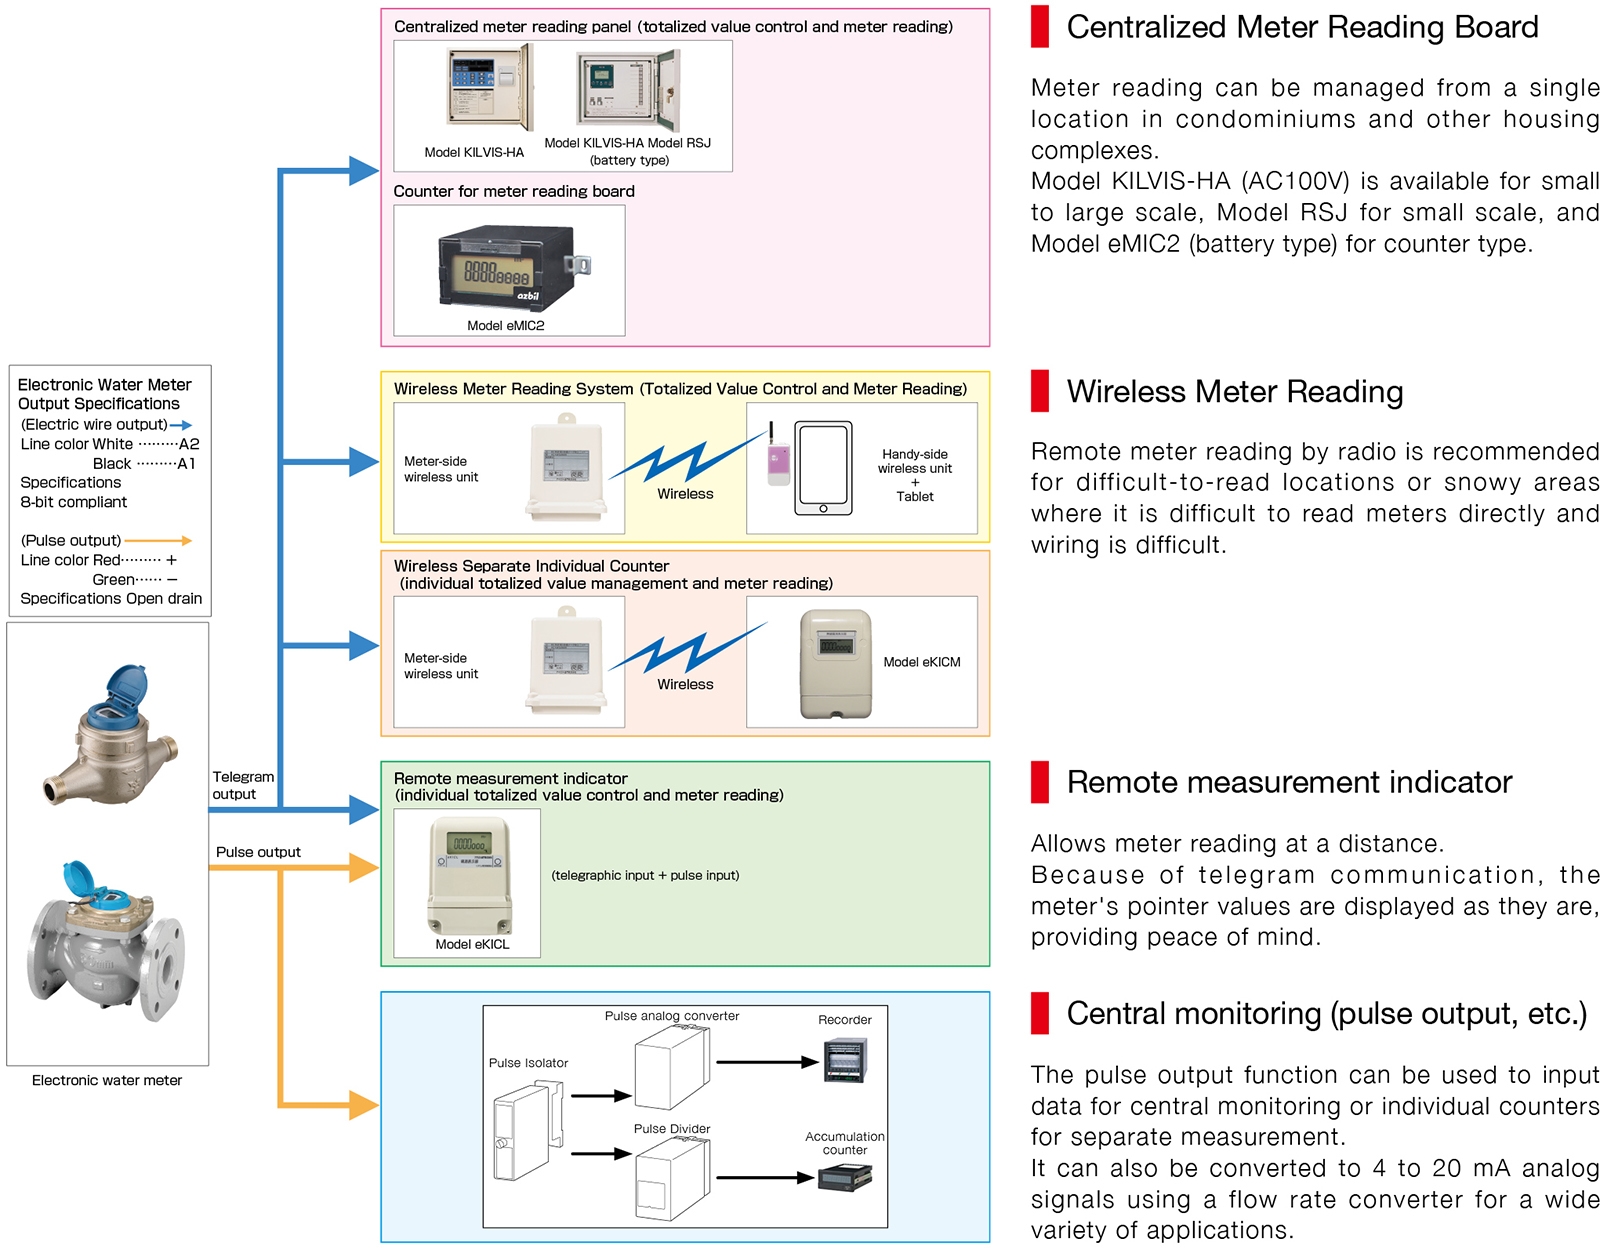 Centralized meter reading panel/wireless meter reading/distance display/central monitoring (Pulse output, etc.)